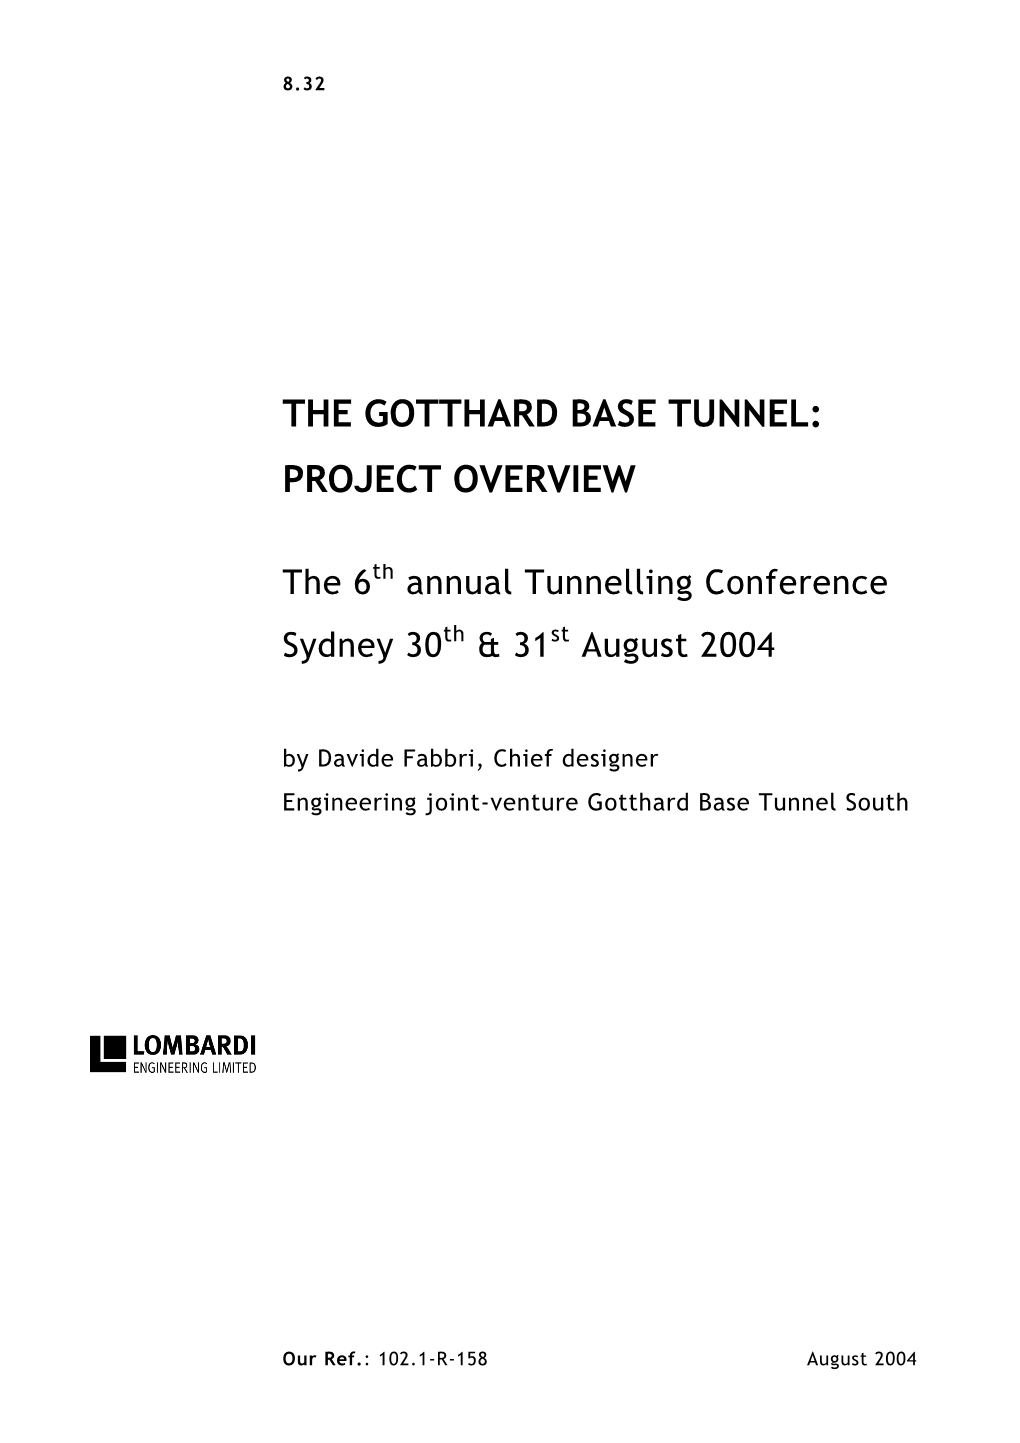 The Gotthard Base Tunnel: Project Overview